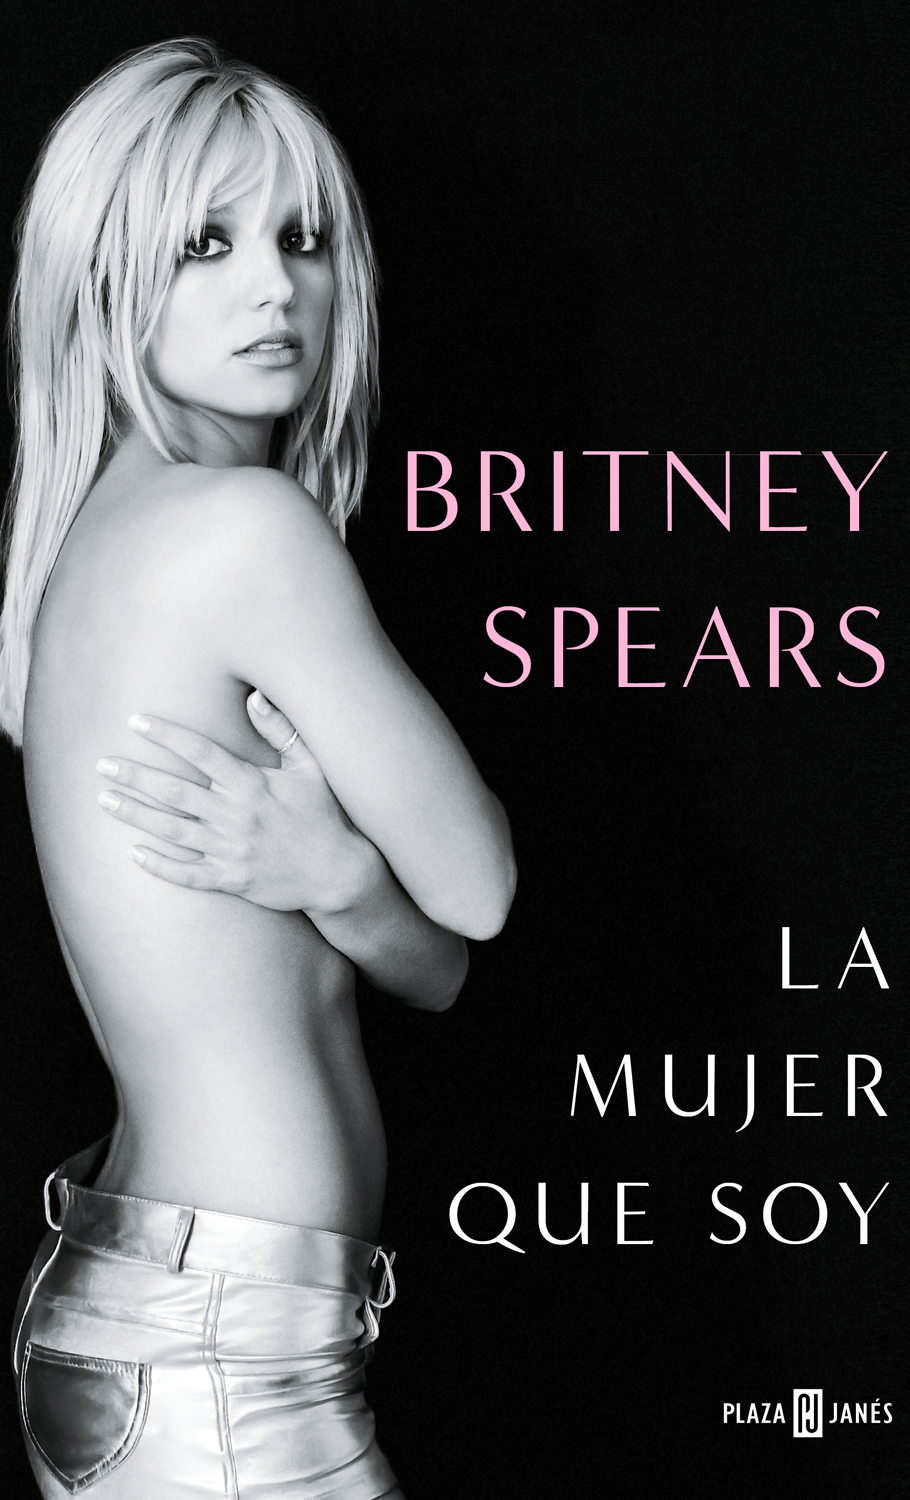 Britney-Spears-La-mujer-que-soy-Cover